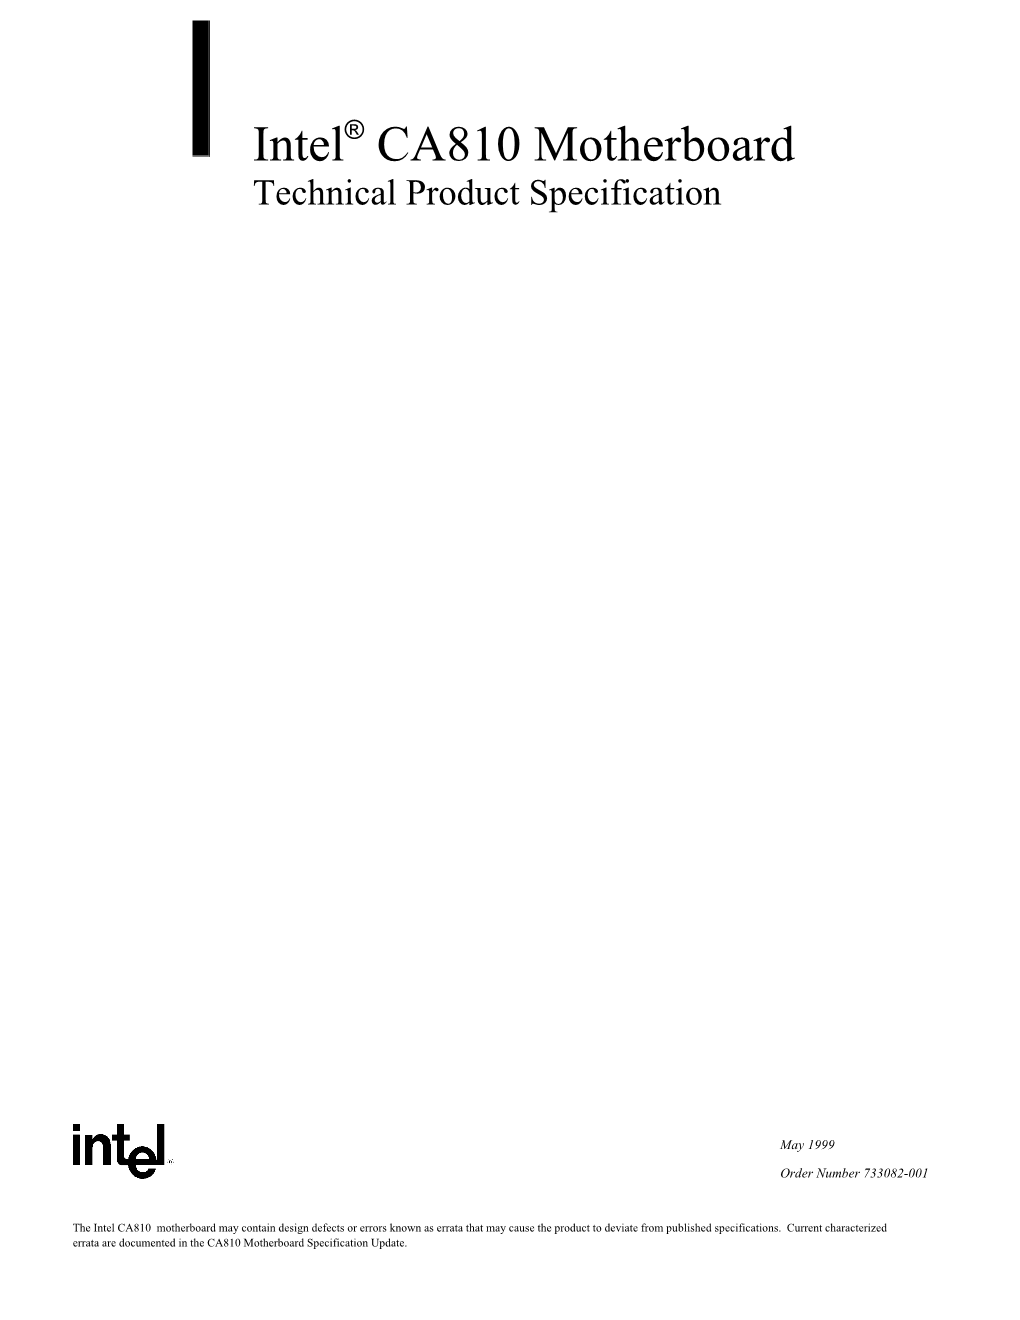 Intel® CA810 Motherboard Technical Product Specification